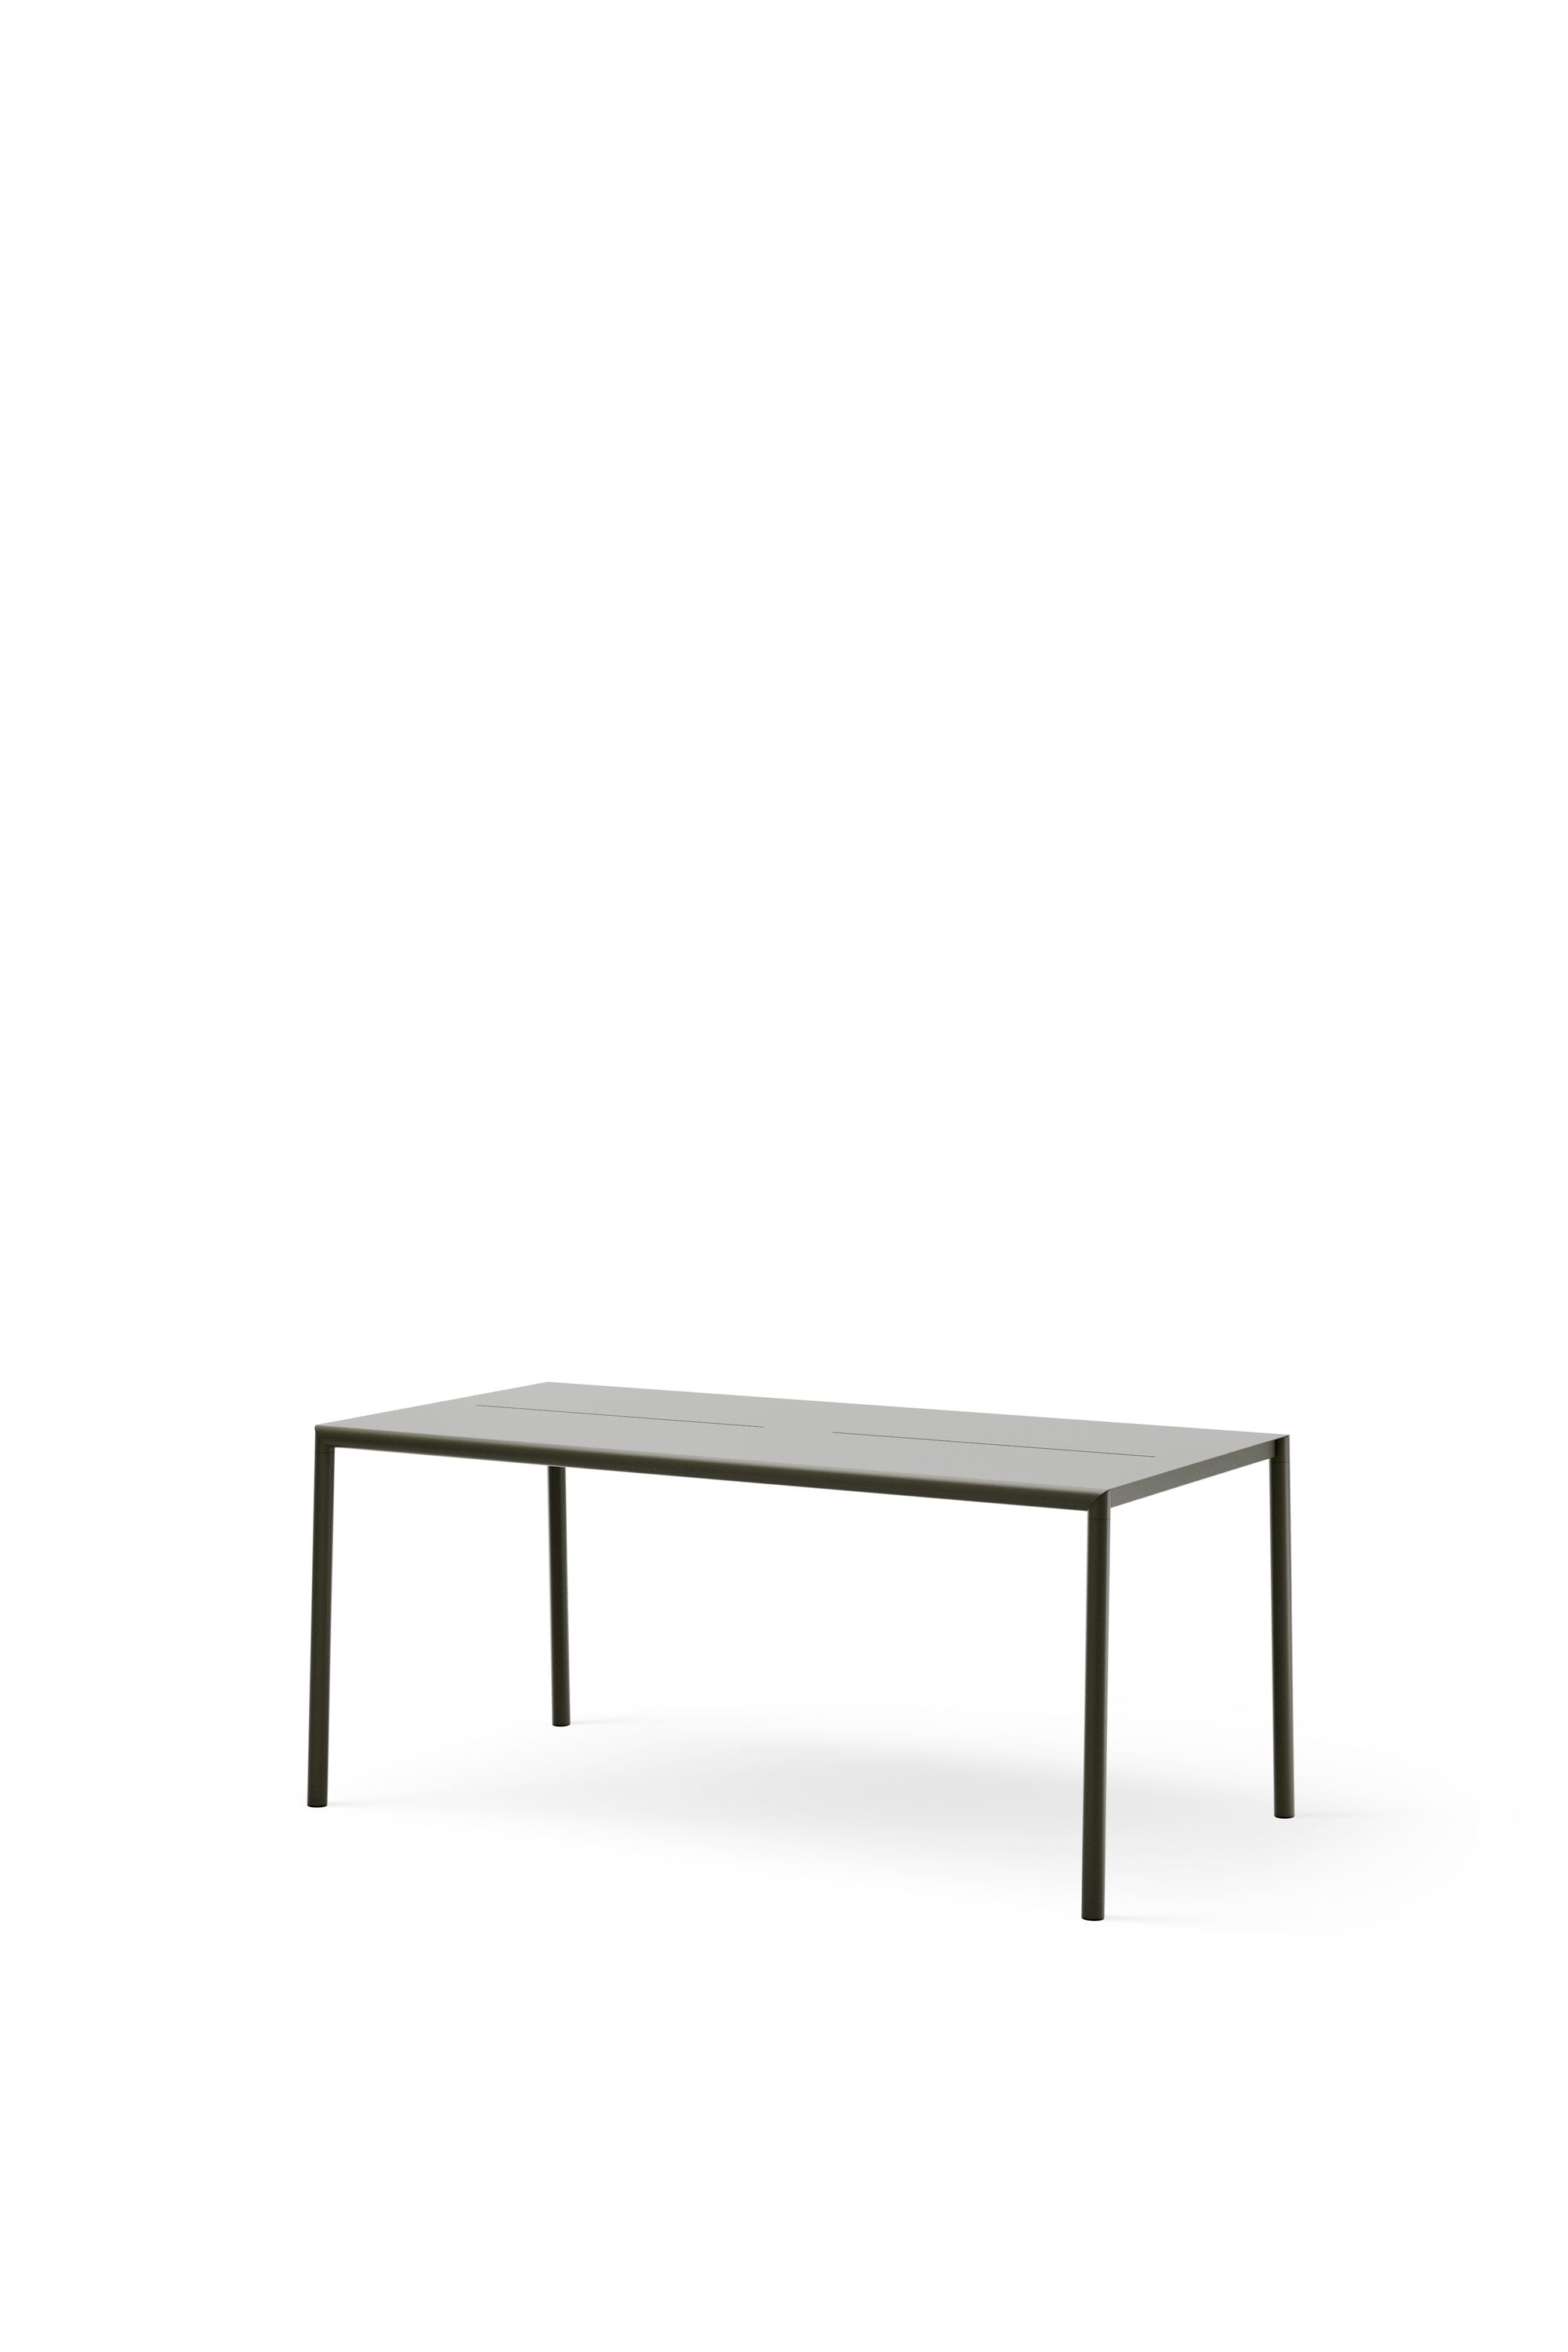 New Works May Table 170 Cm, Dark Green